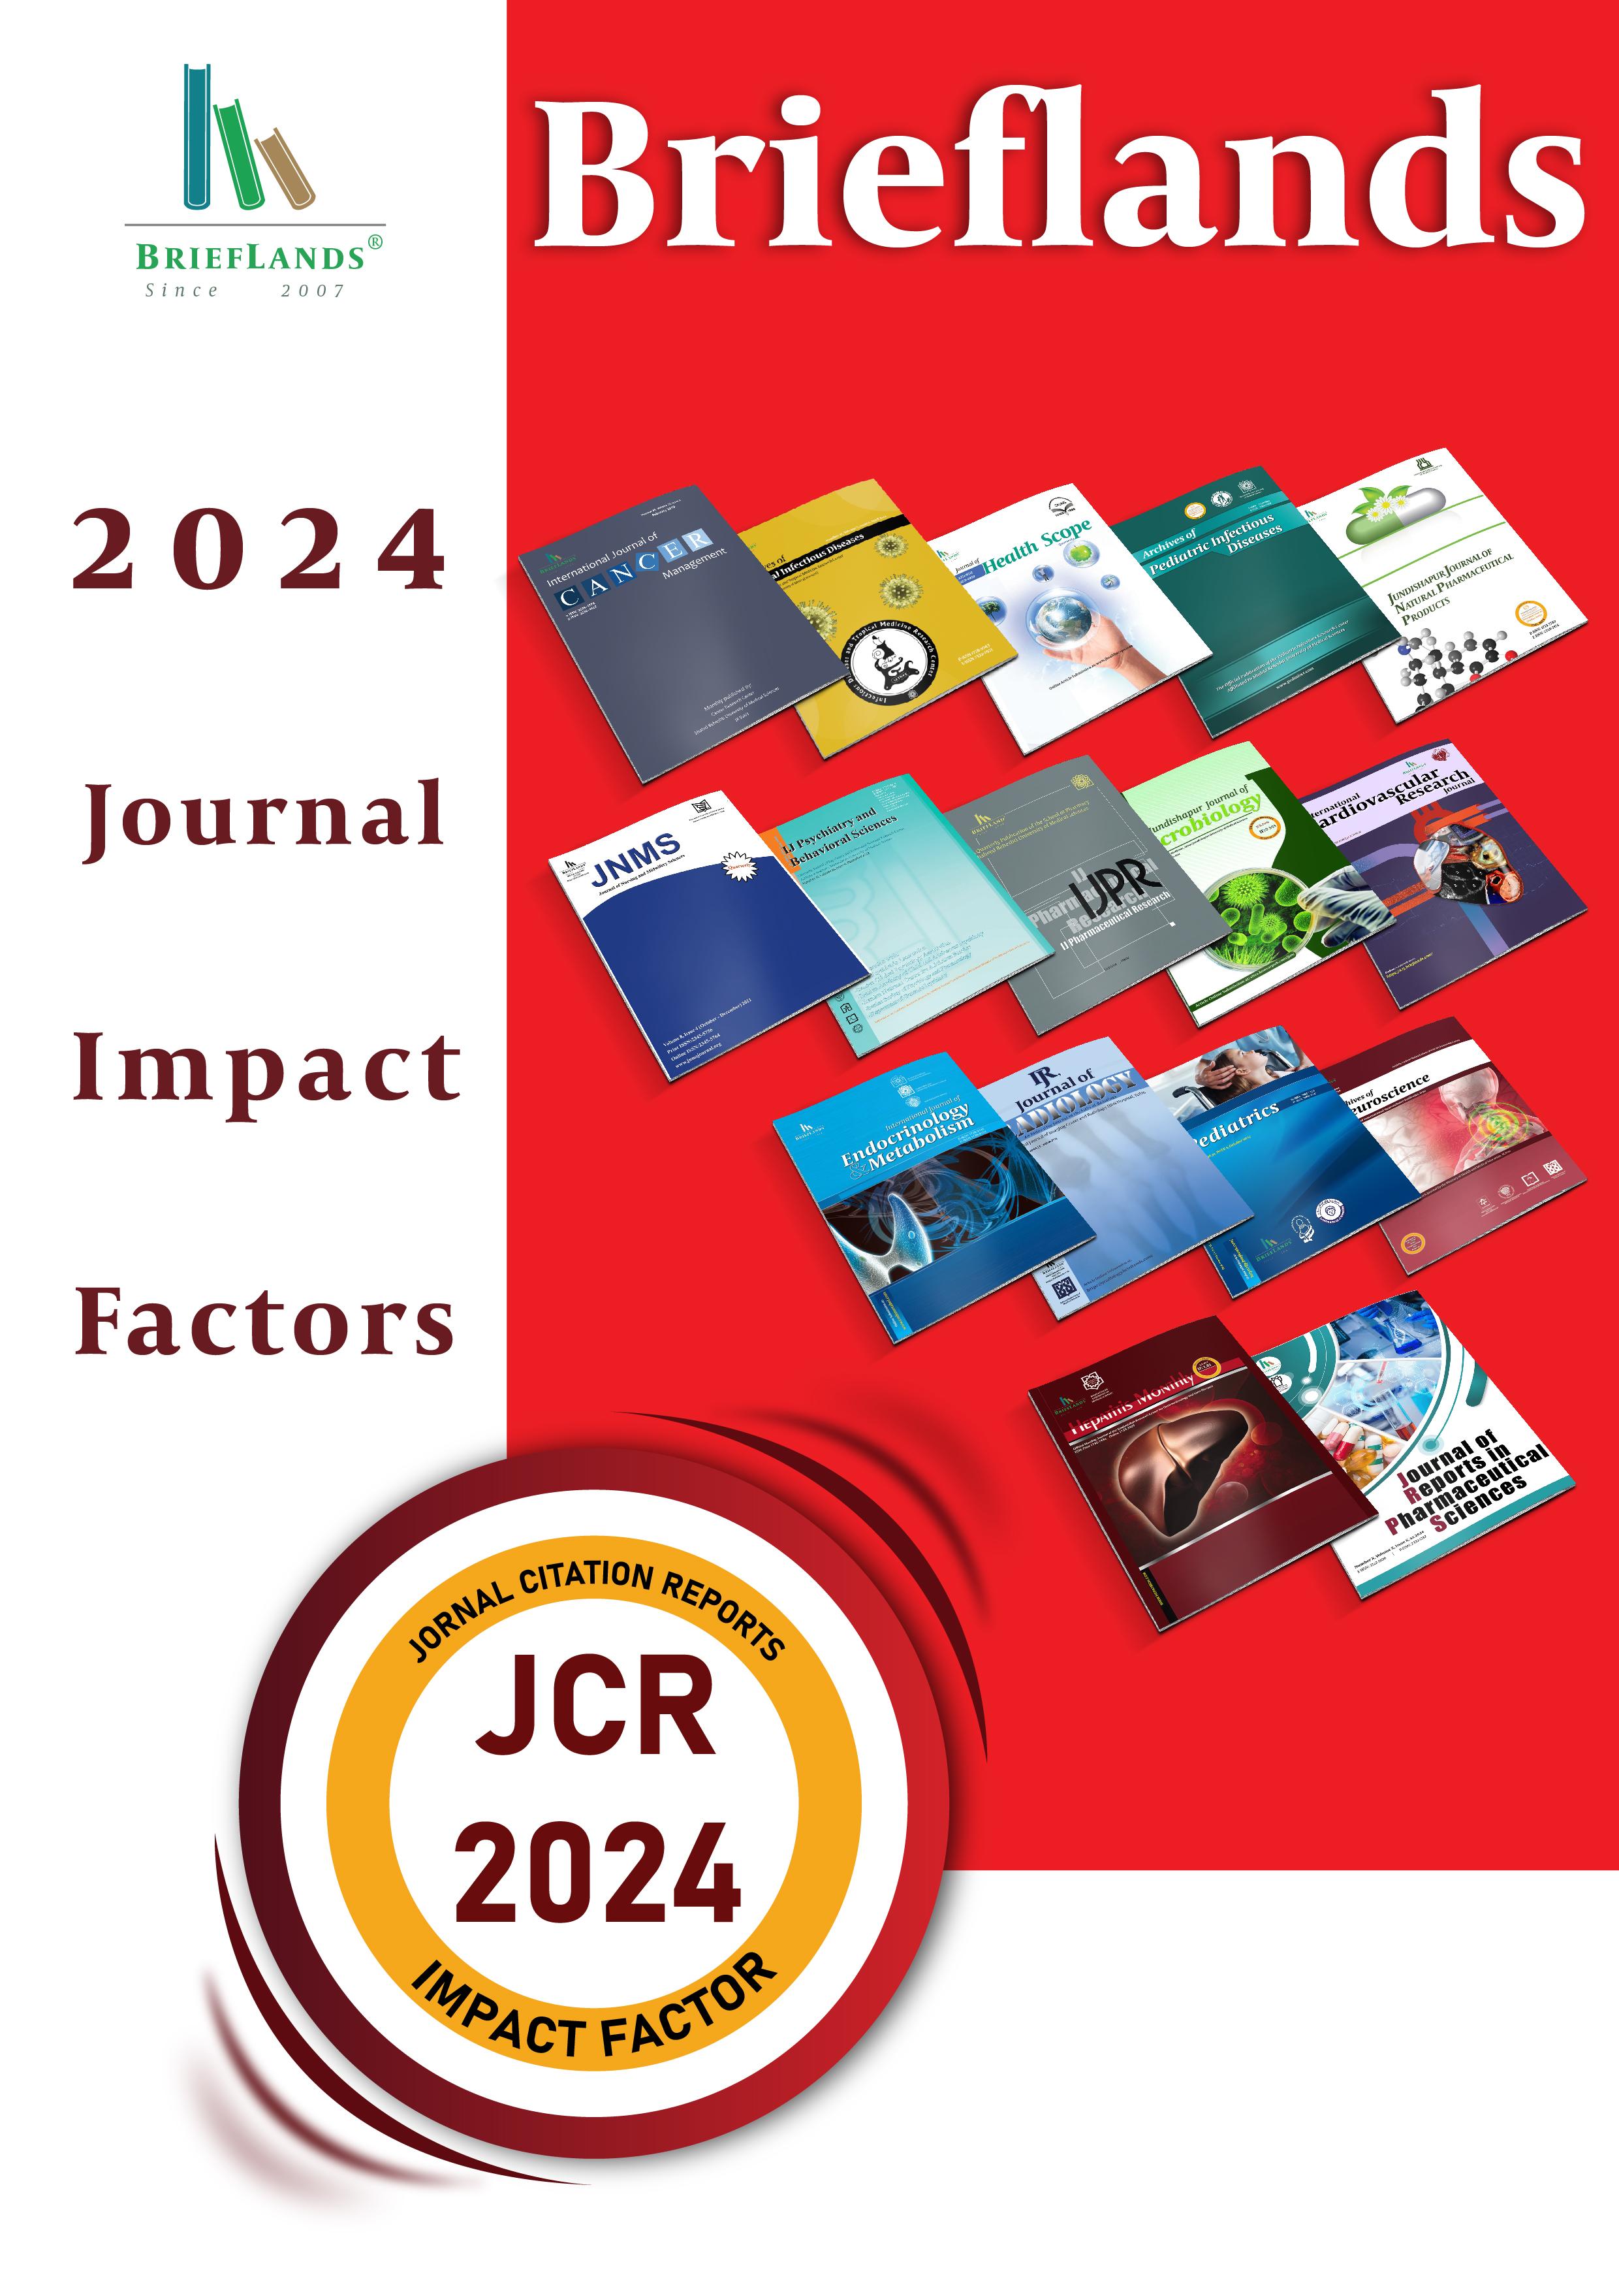 Brieflands, a leading STM (Science, Technology, and Medicine) publisher, is pleased to announce the release of its 2024 Journal Citation Reports (JCR) Impact Factors from Clarivate. This announcement highlights the continued commitment of Brieflands journals to high-quality research and scholarly communication.